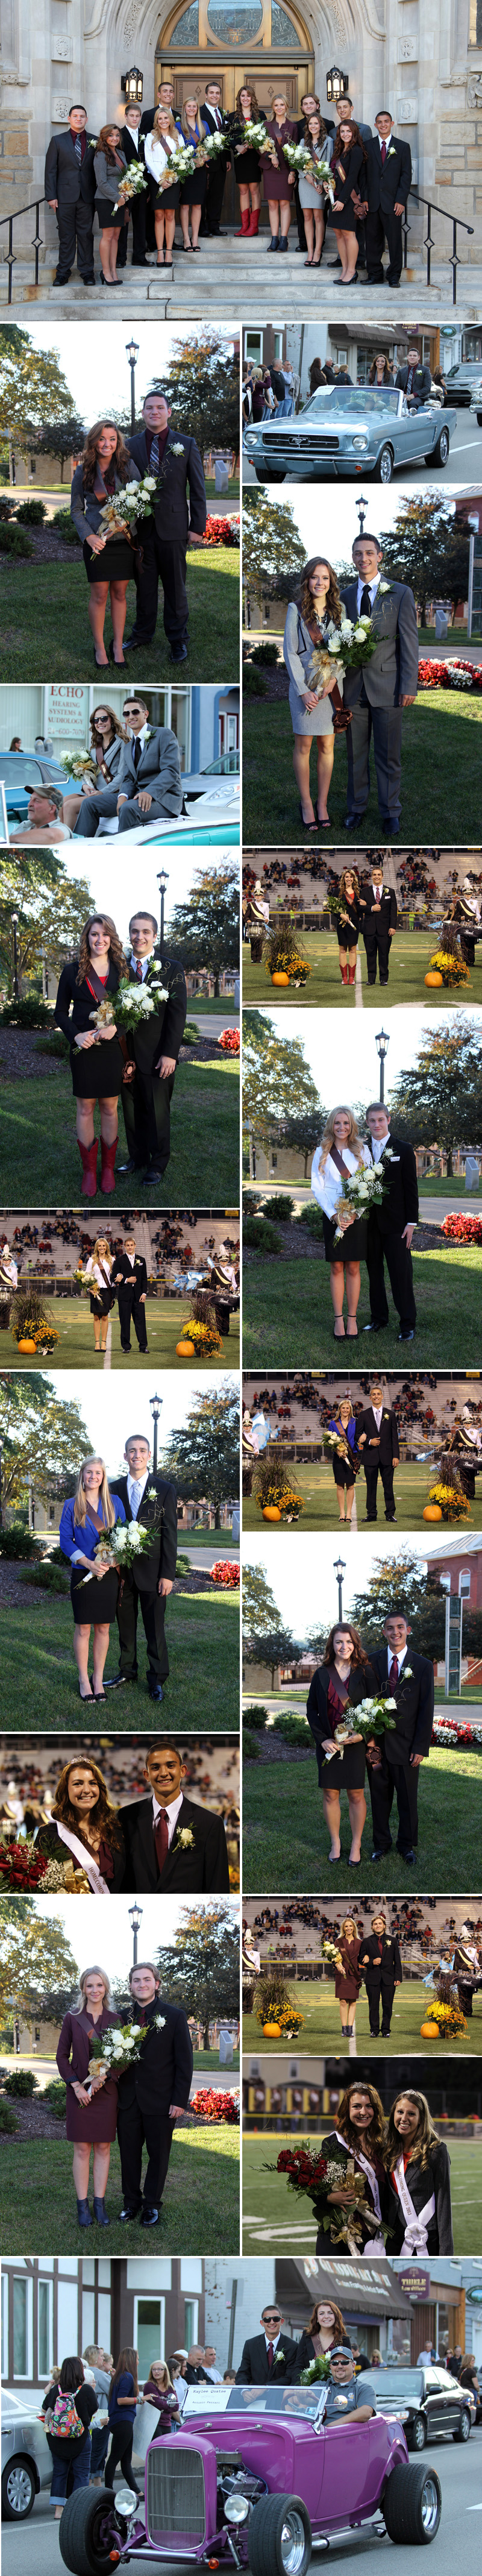 homecomingcollage